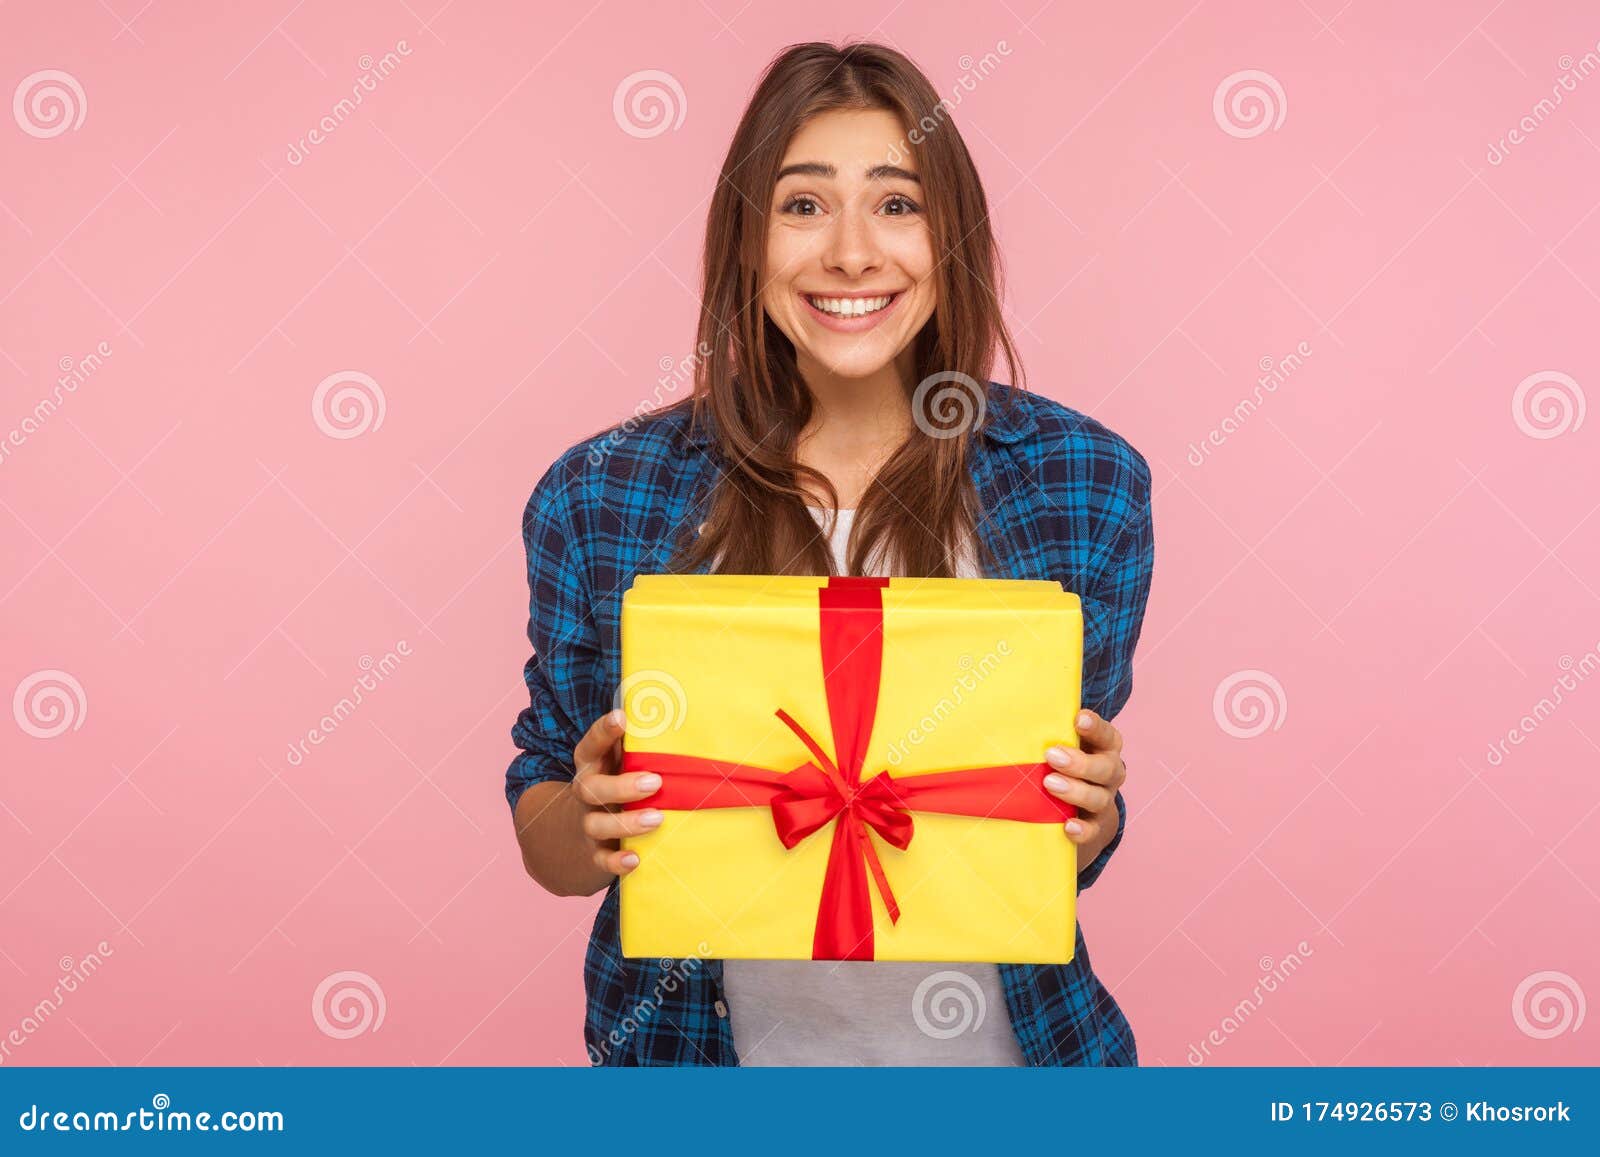 amazing bonus, holiday present! portrait of extremely happy girl in checkered shirt holding wrapped box